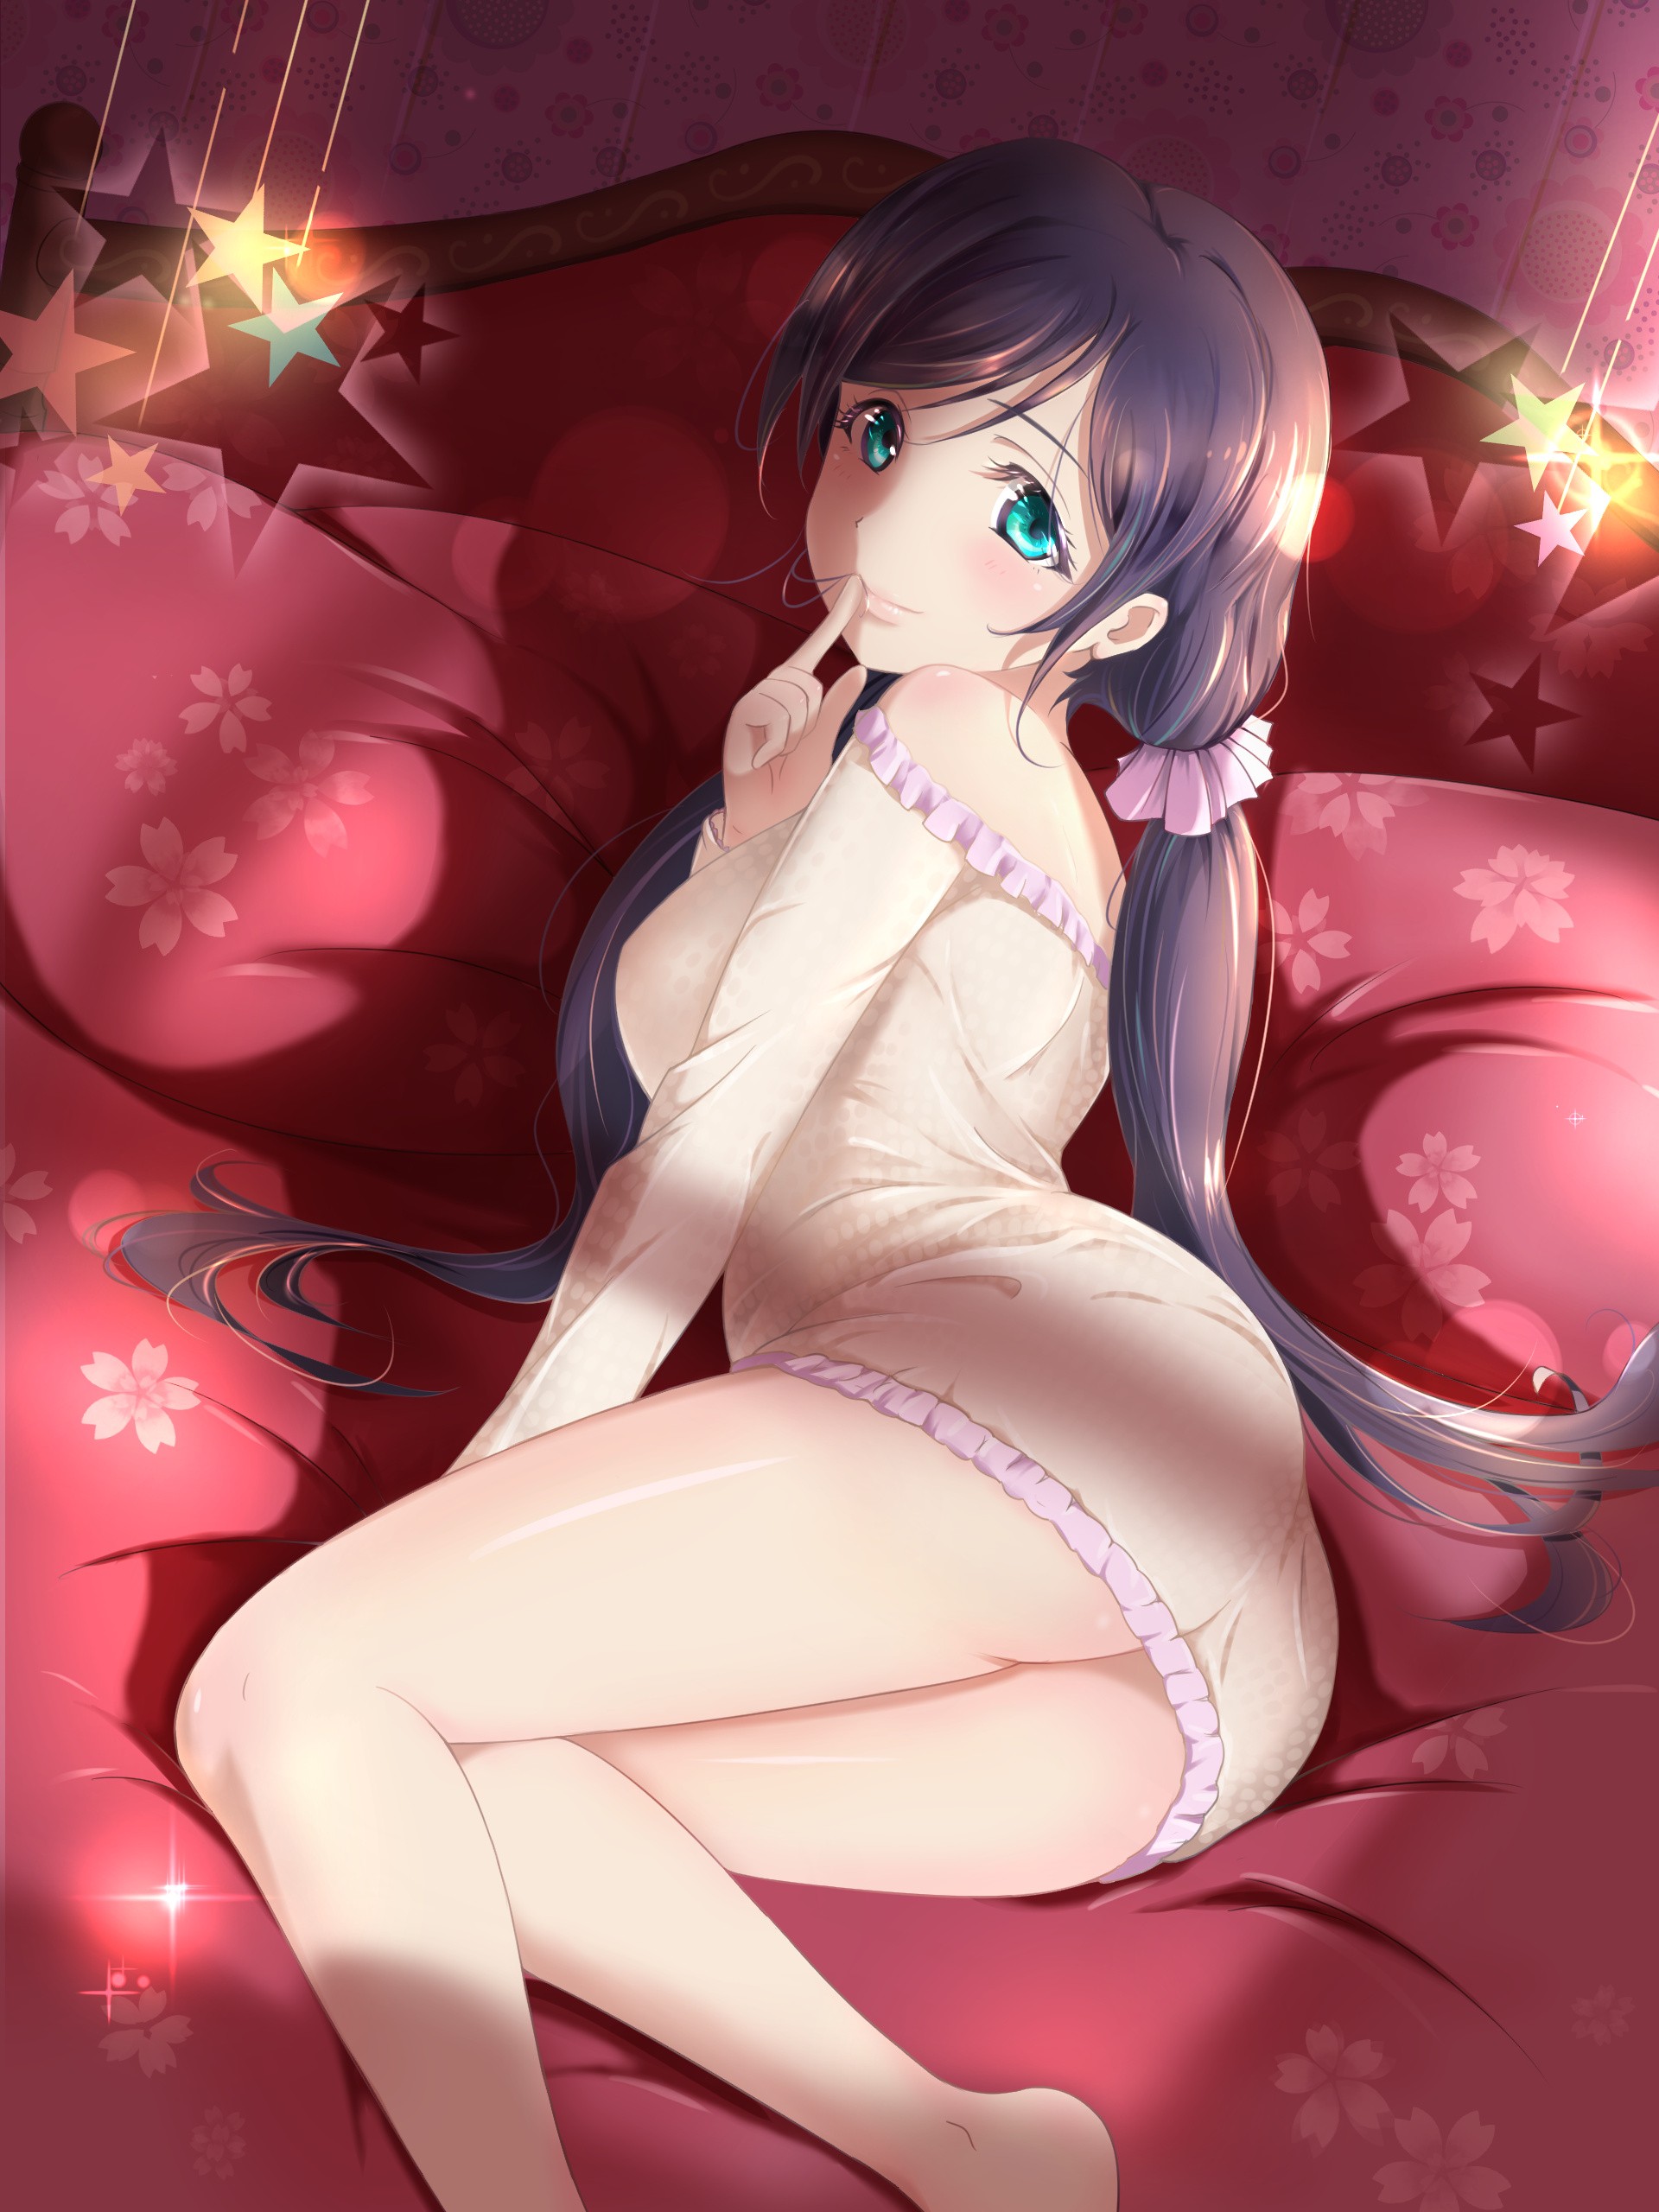 Anime 1920x2560 anime anime girls Love Live! Toujou Nozomi long hair ass legs Xiao Ren Pixiv women indoors indoors in bed bed bedroom aqua eyes lingerie thighs legs together